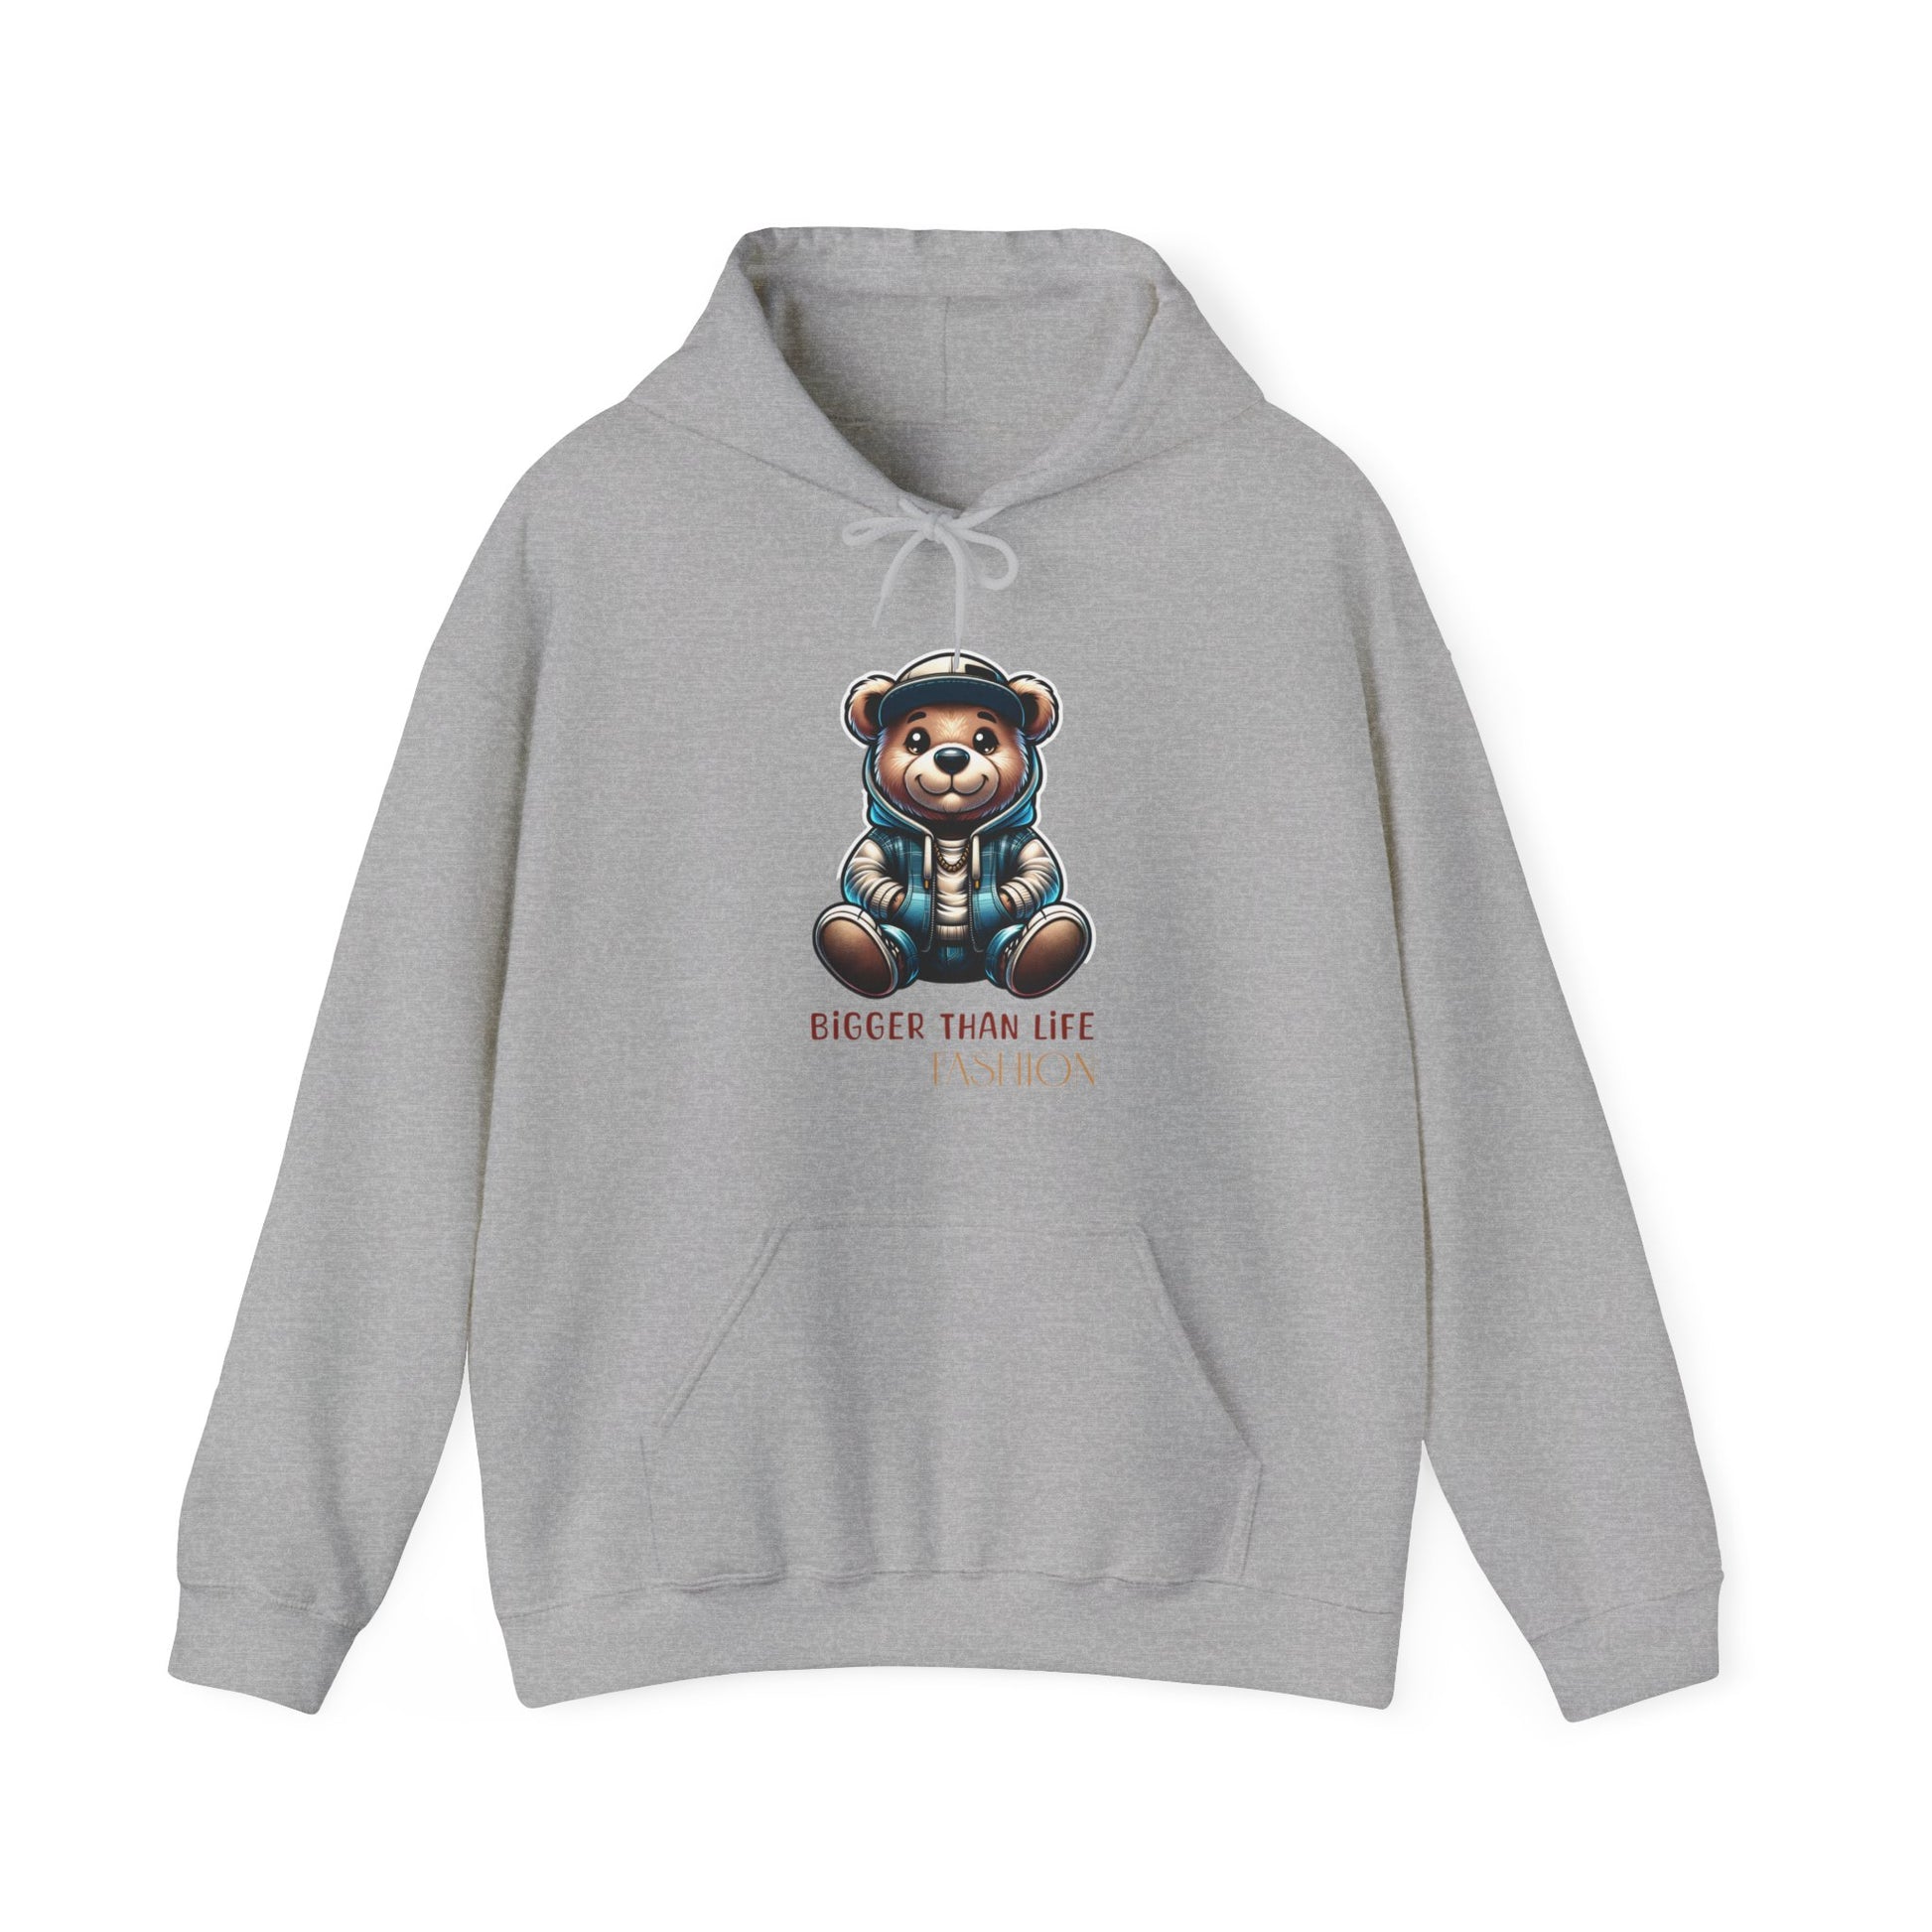 Cozy unisex hoodie with a street-savvy teddy bear design, embodying urban culture and fashion.